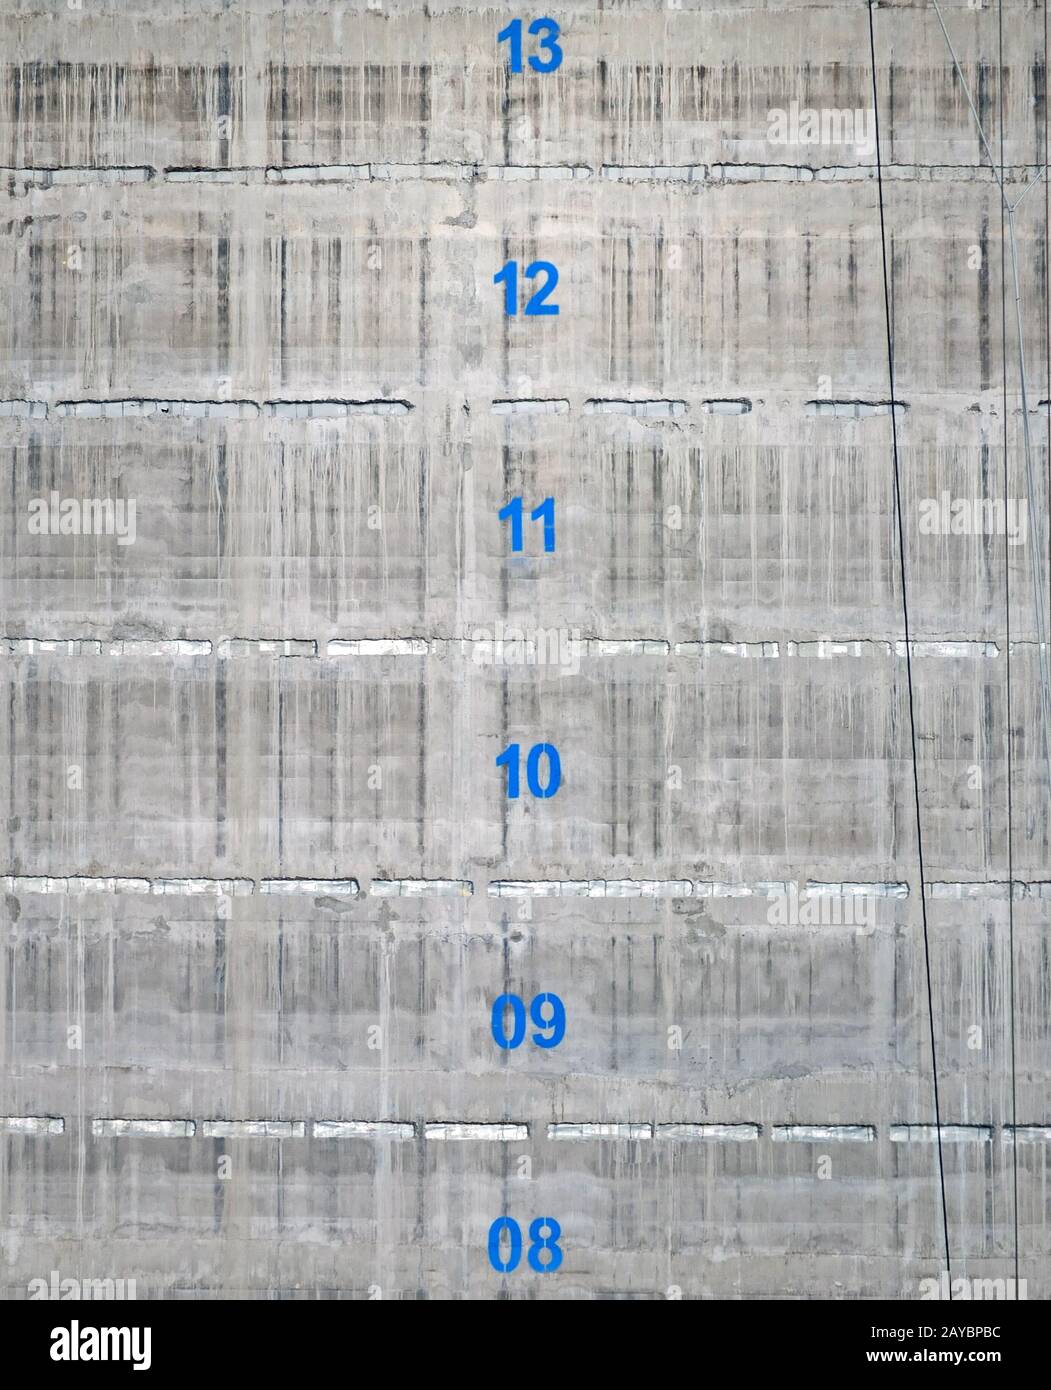 the surface of a concrete service tower core of a building under construction with the floor numbers marked in blue paint Stock Photo